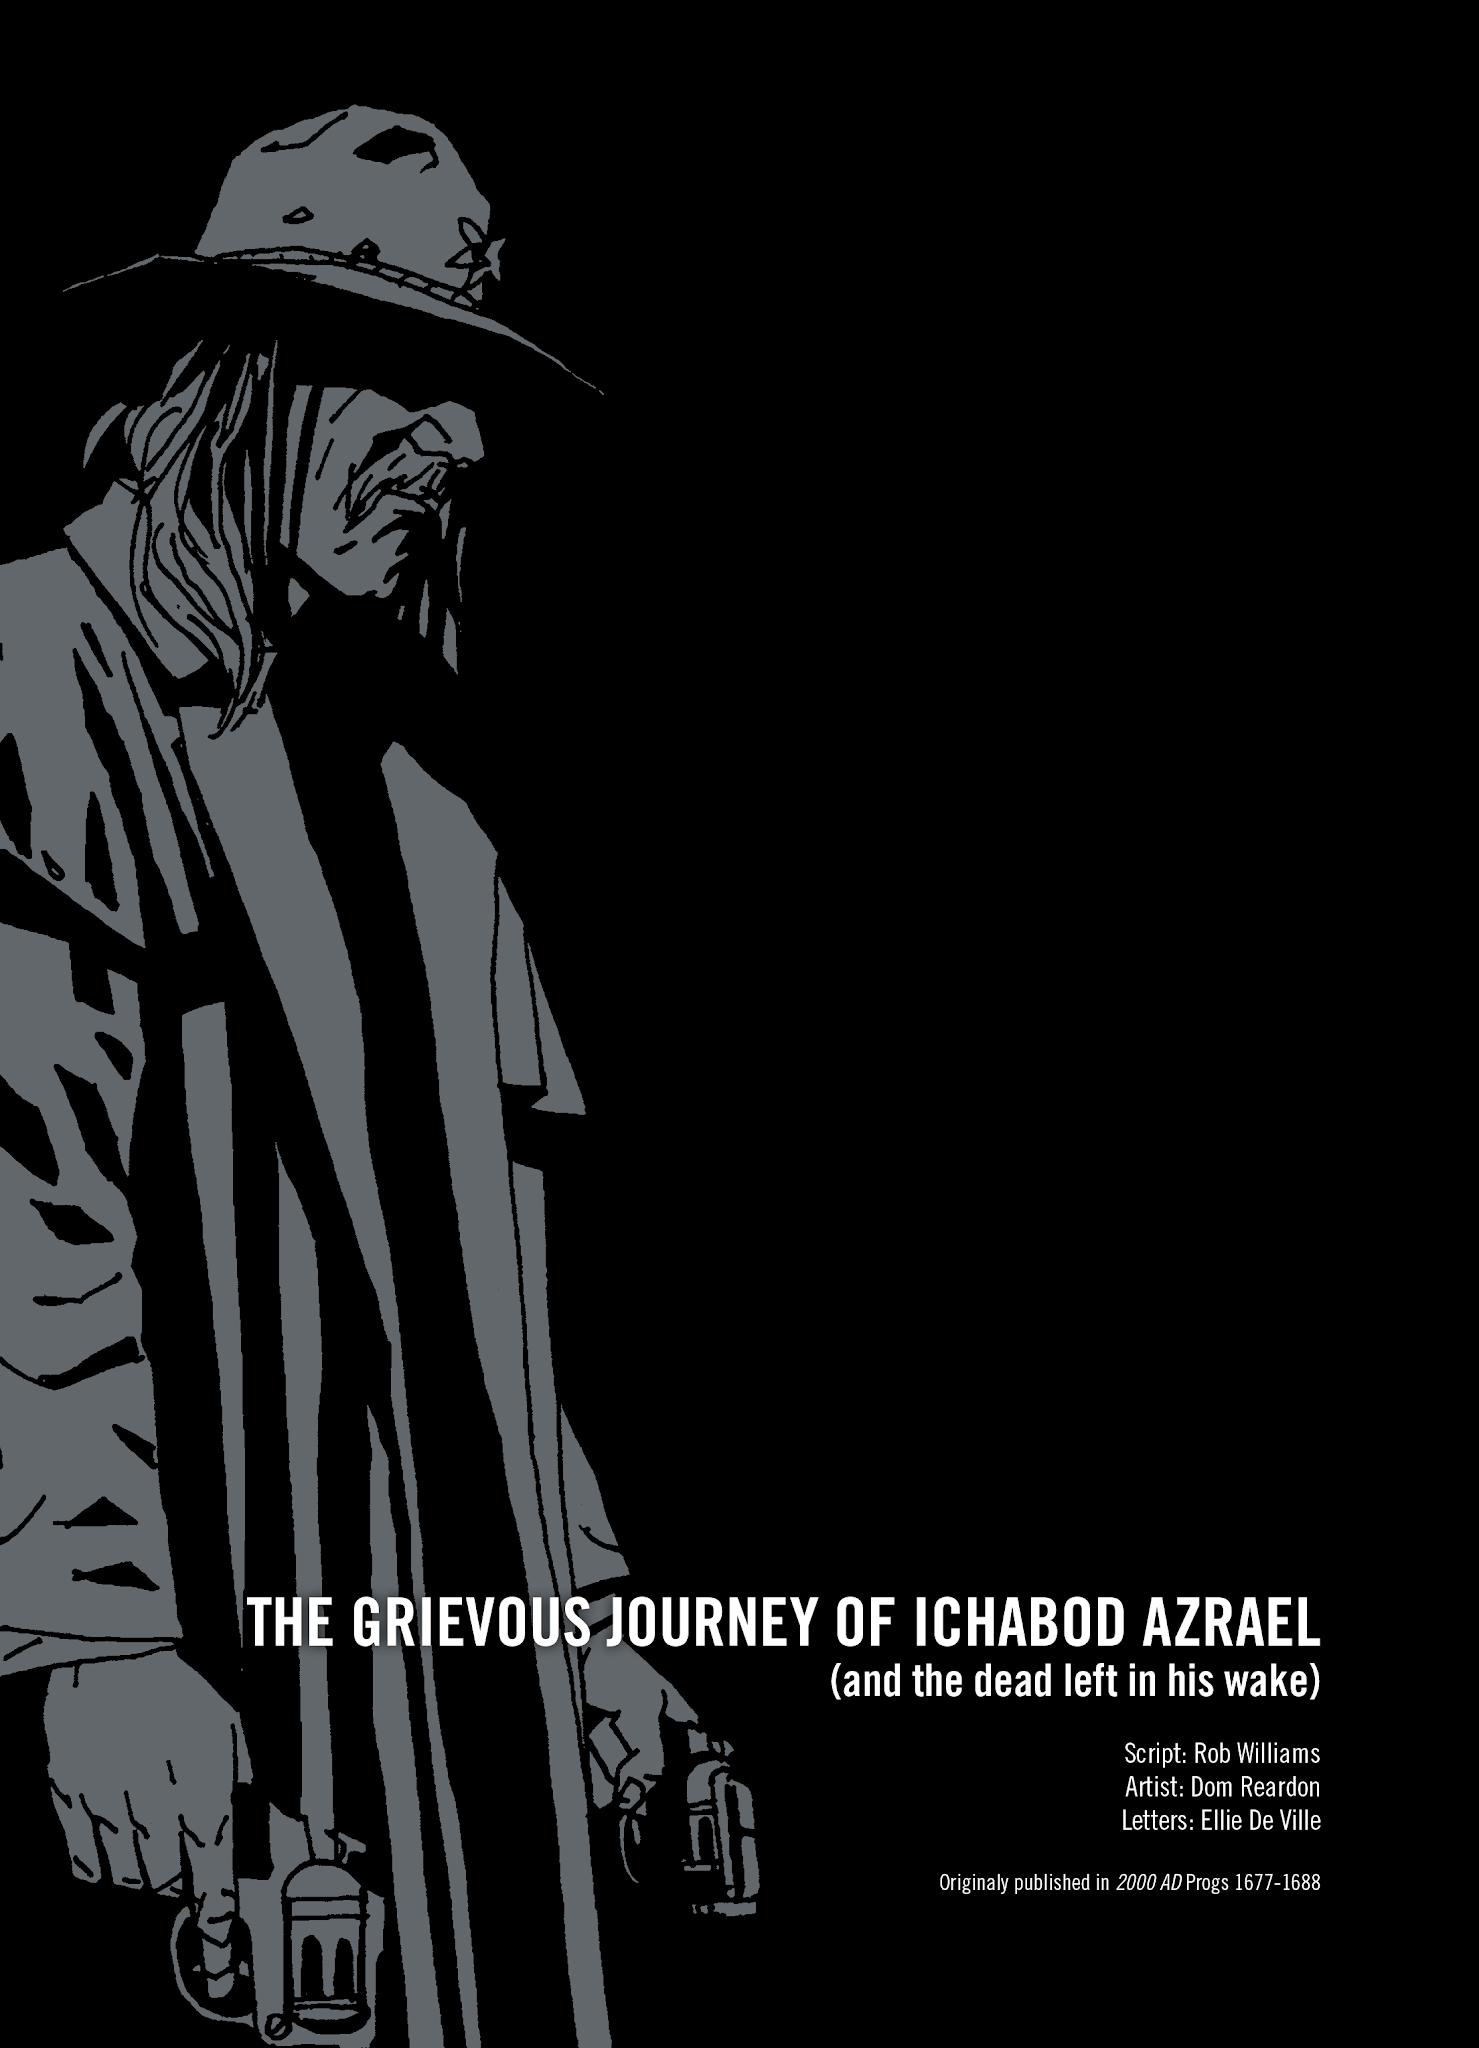 Read online The Grievous Journey of Ichabod Azrael (and the DEAD LEFT in His WAKE) comic -  Issue # TPB - 6